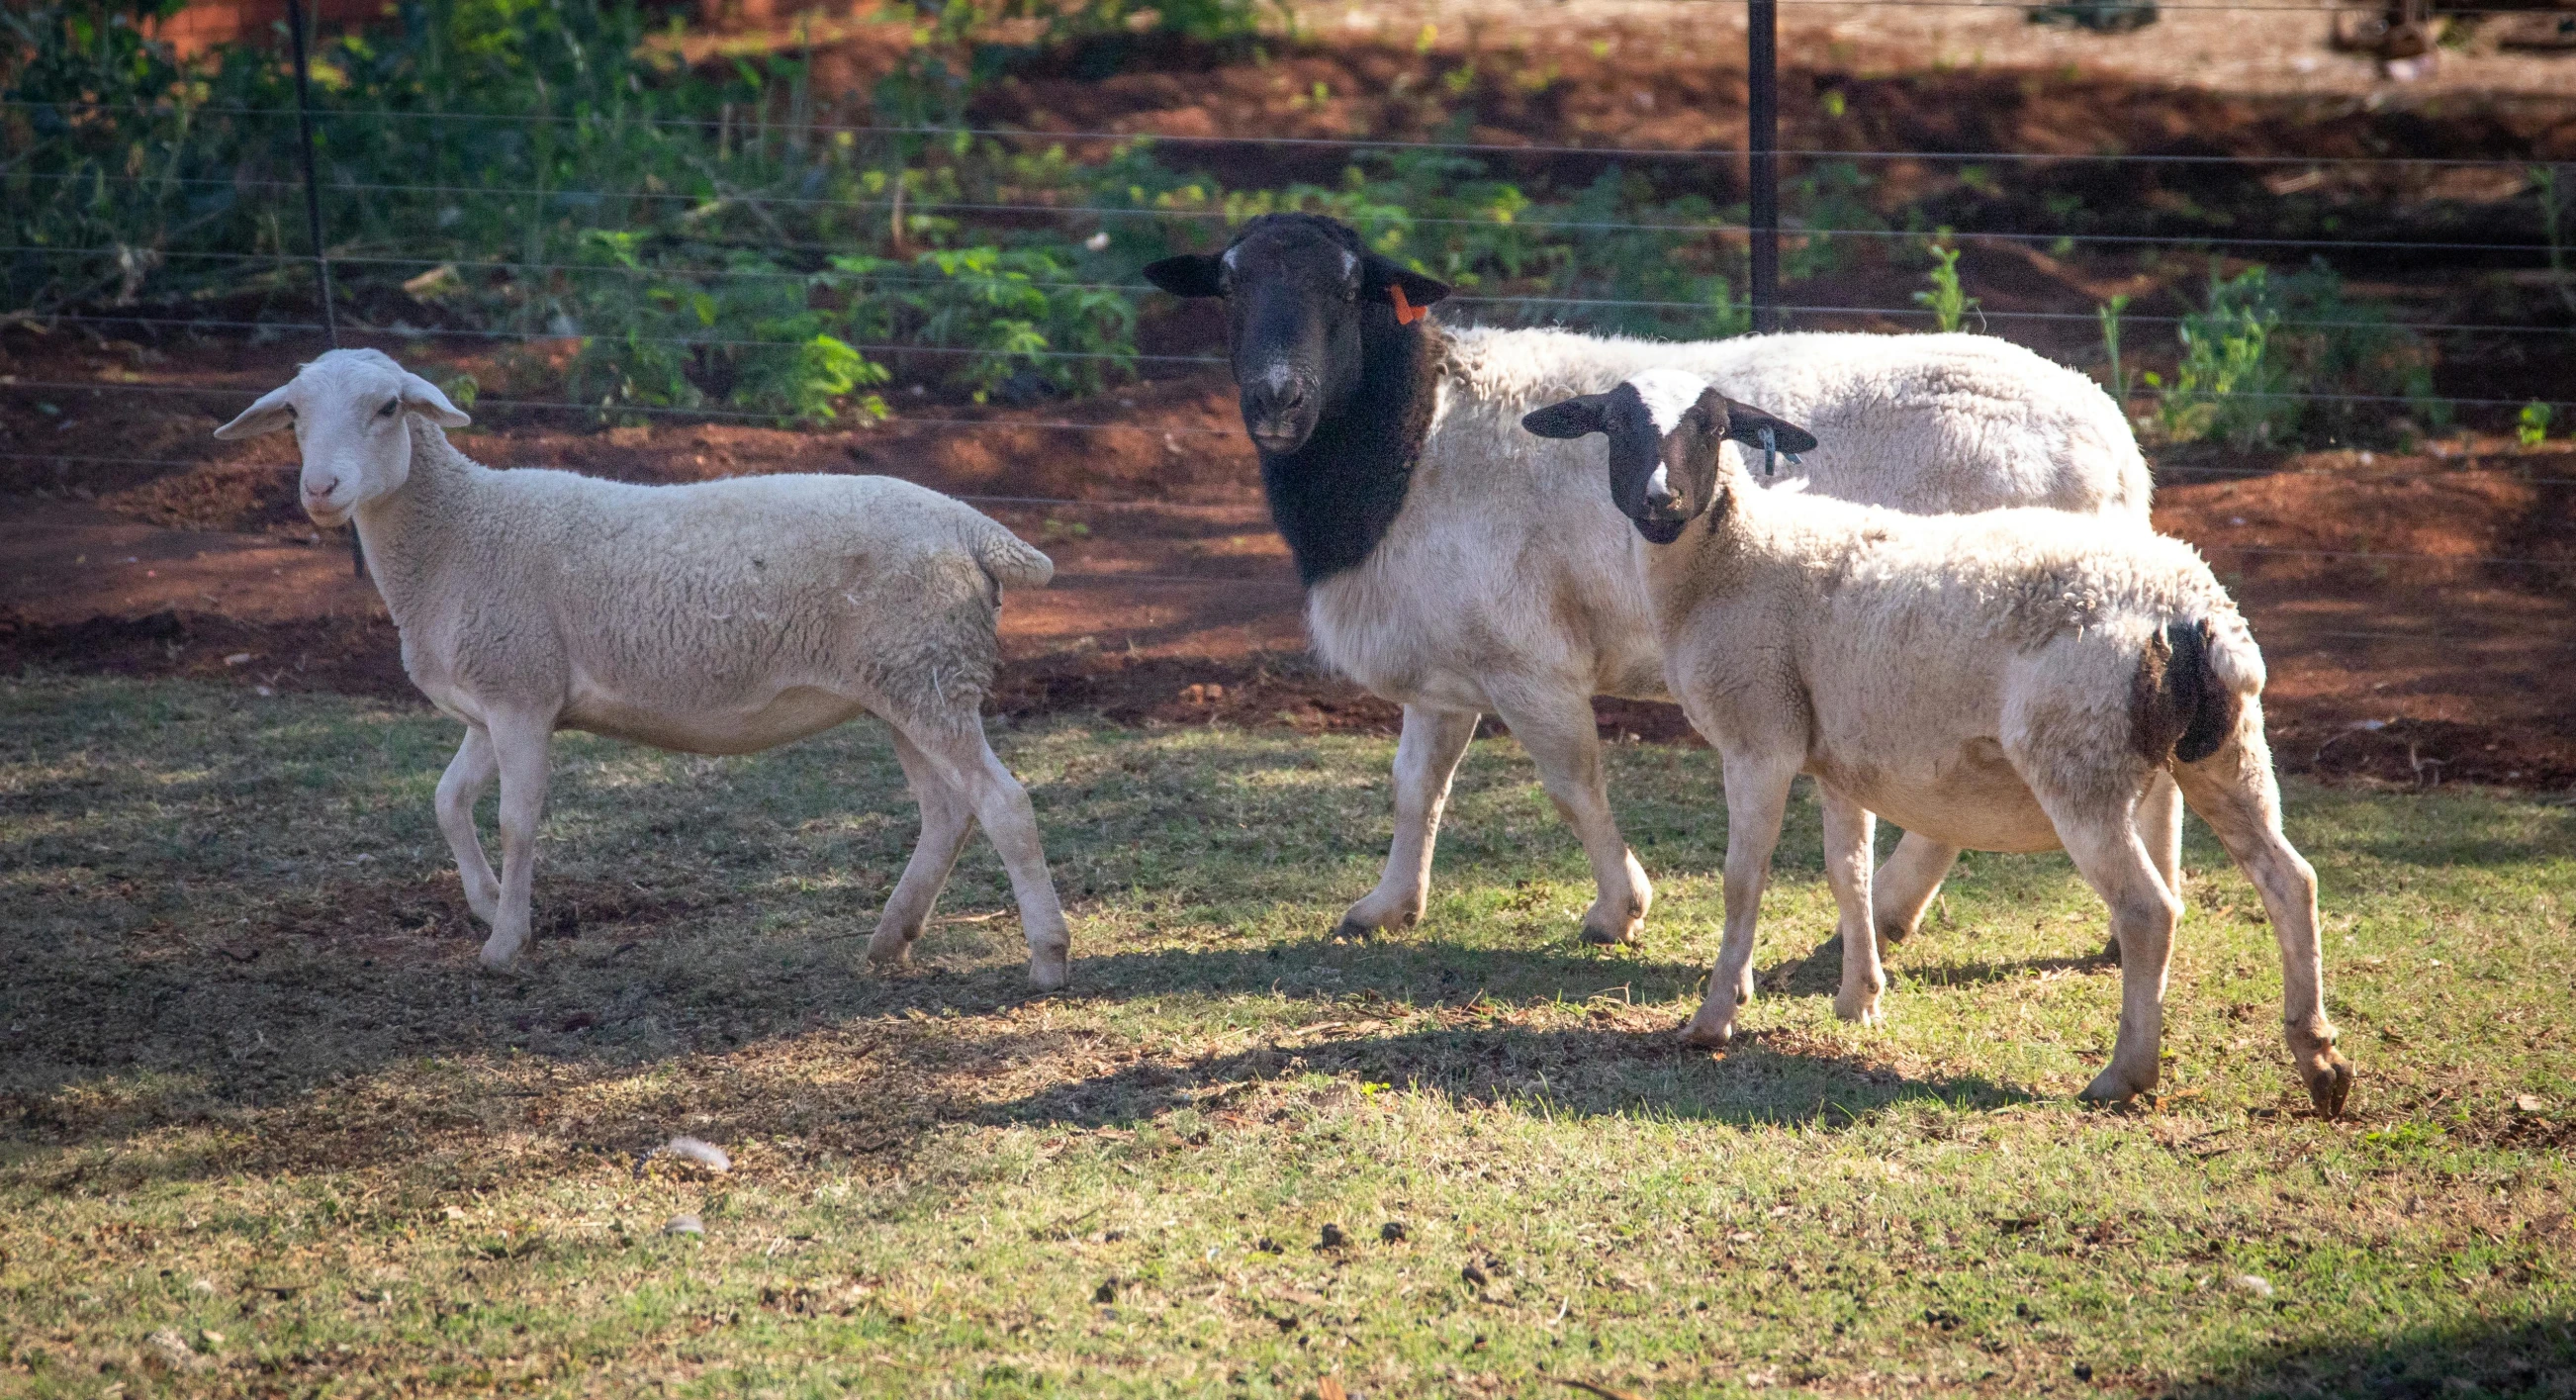 a herd of sheep standing on top of a grass covered field, tamborine, three animals, no cropping, college